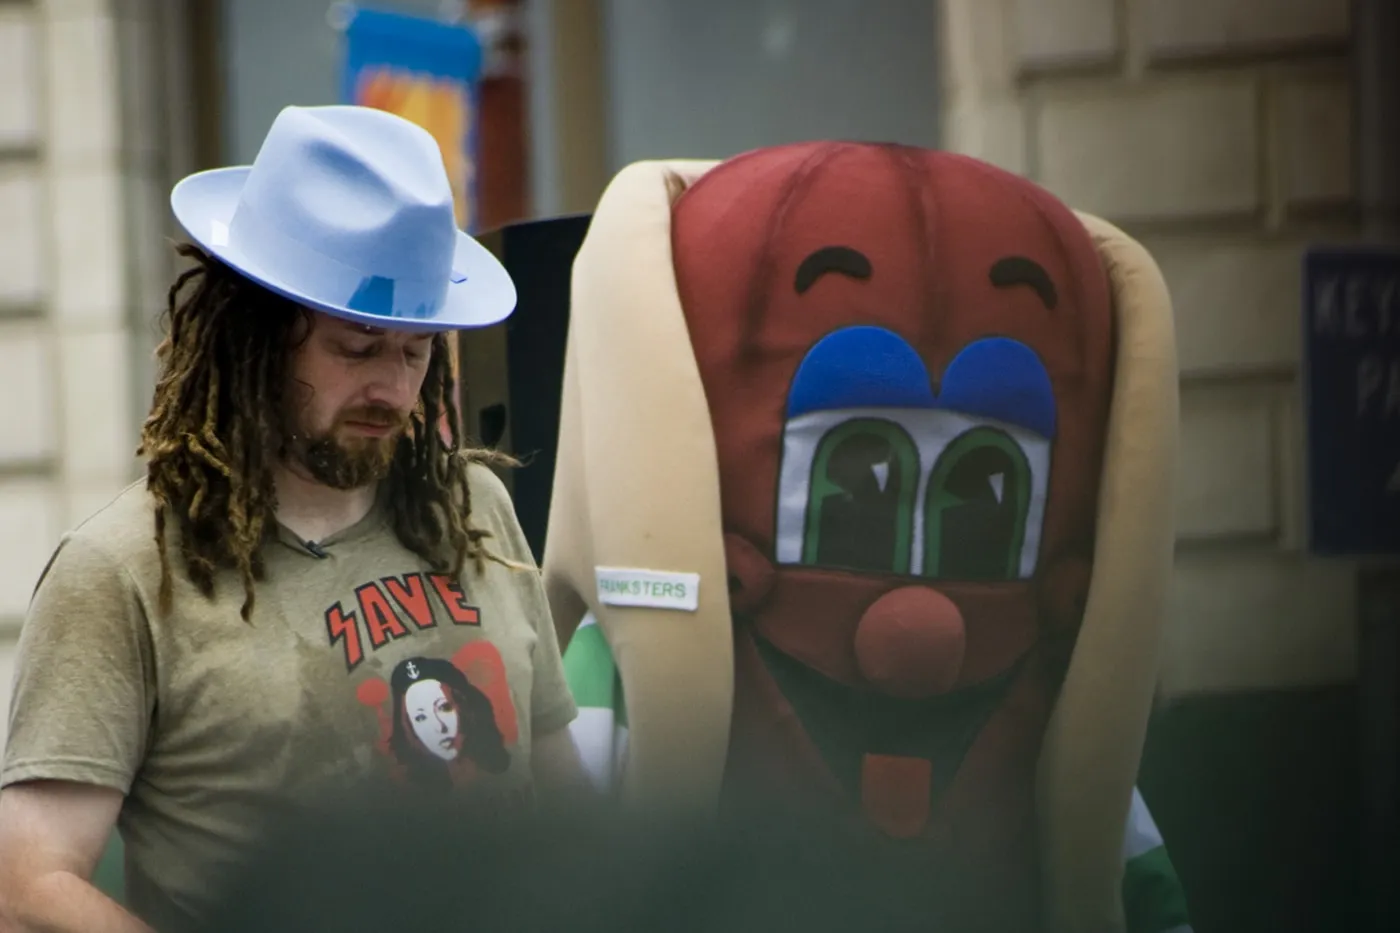 Crazy Legs Conti at the July 4th Coney Island Hot Dog Eating Contest